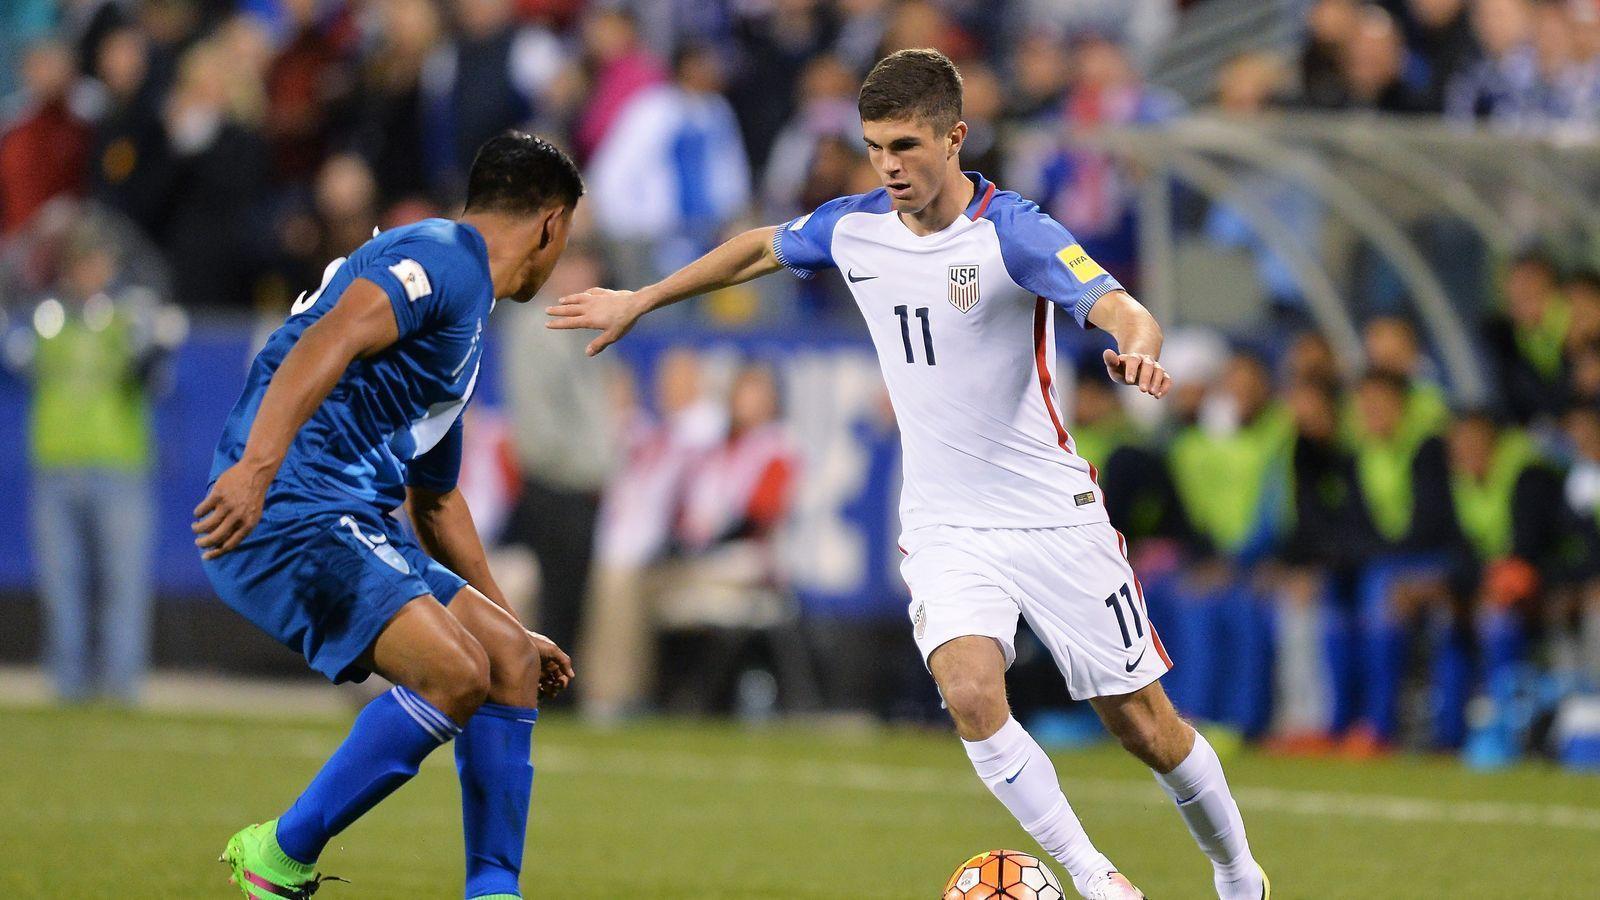 What&next for Christian Pulisic now that he&cap